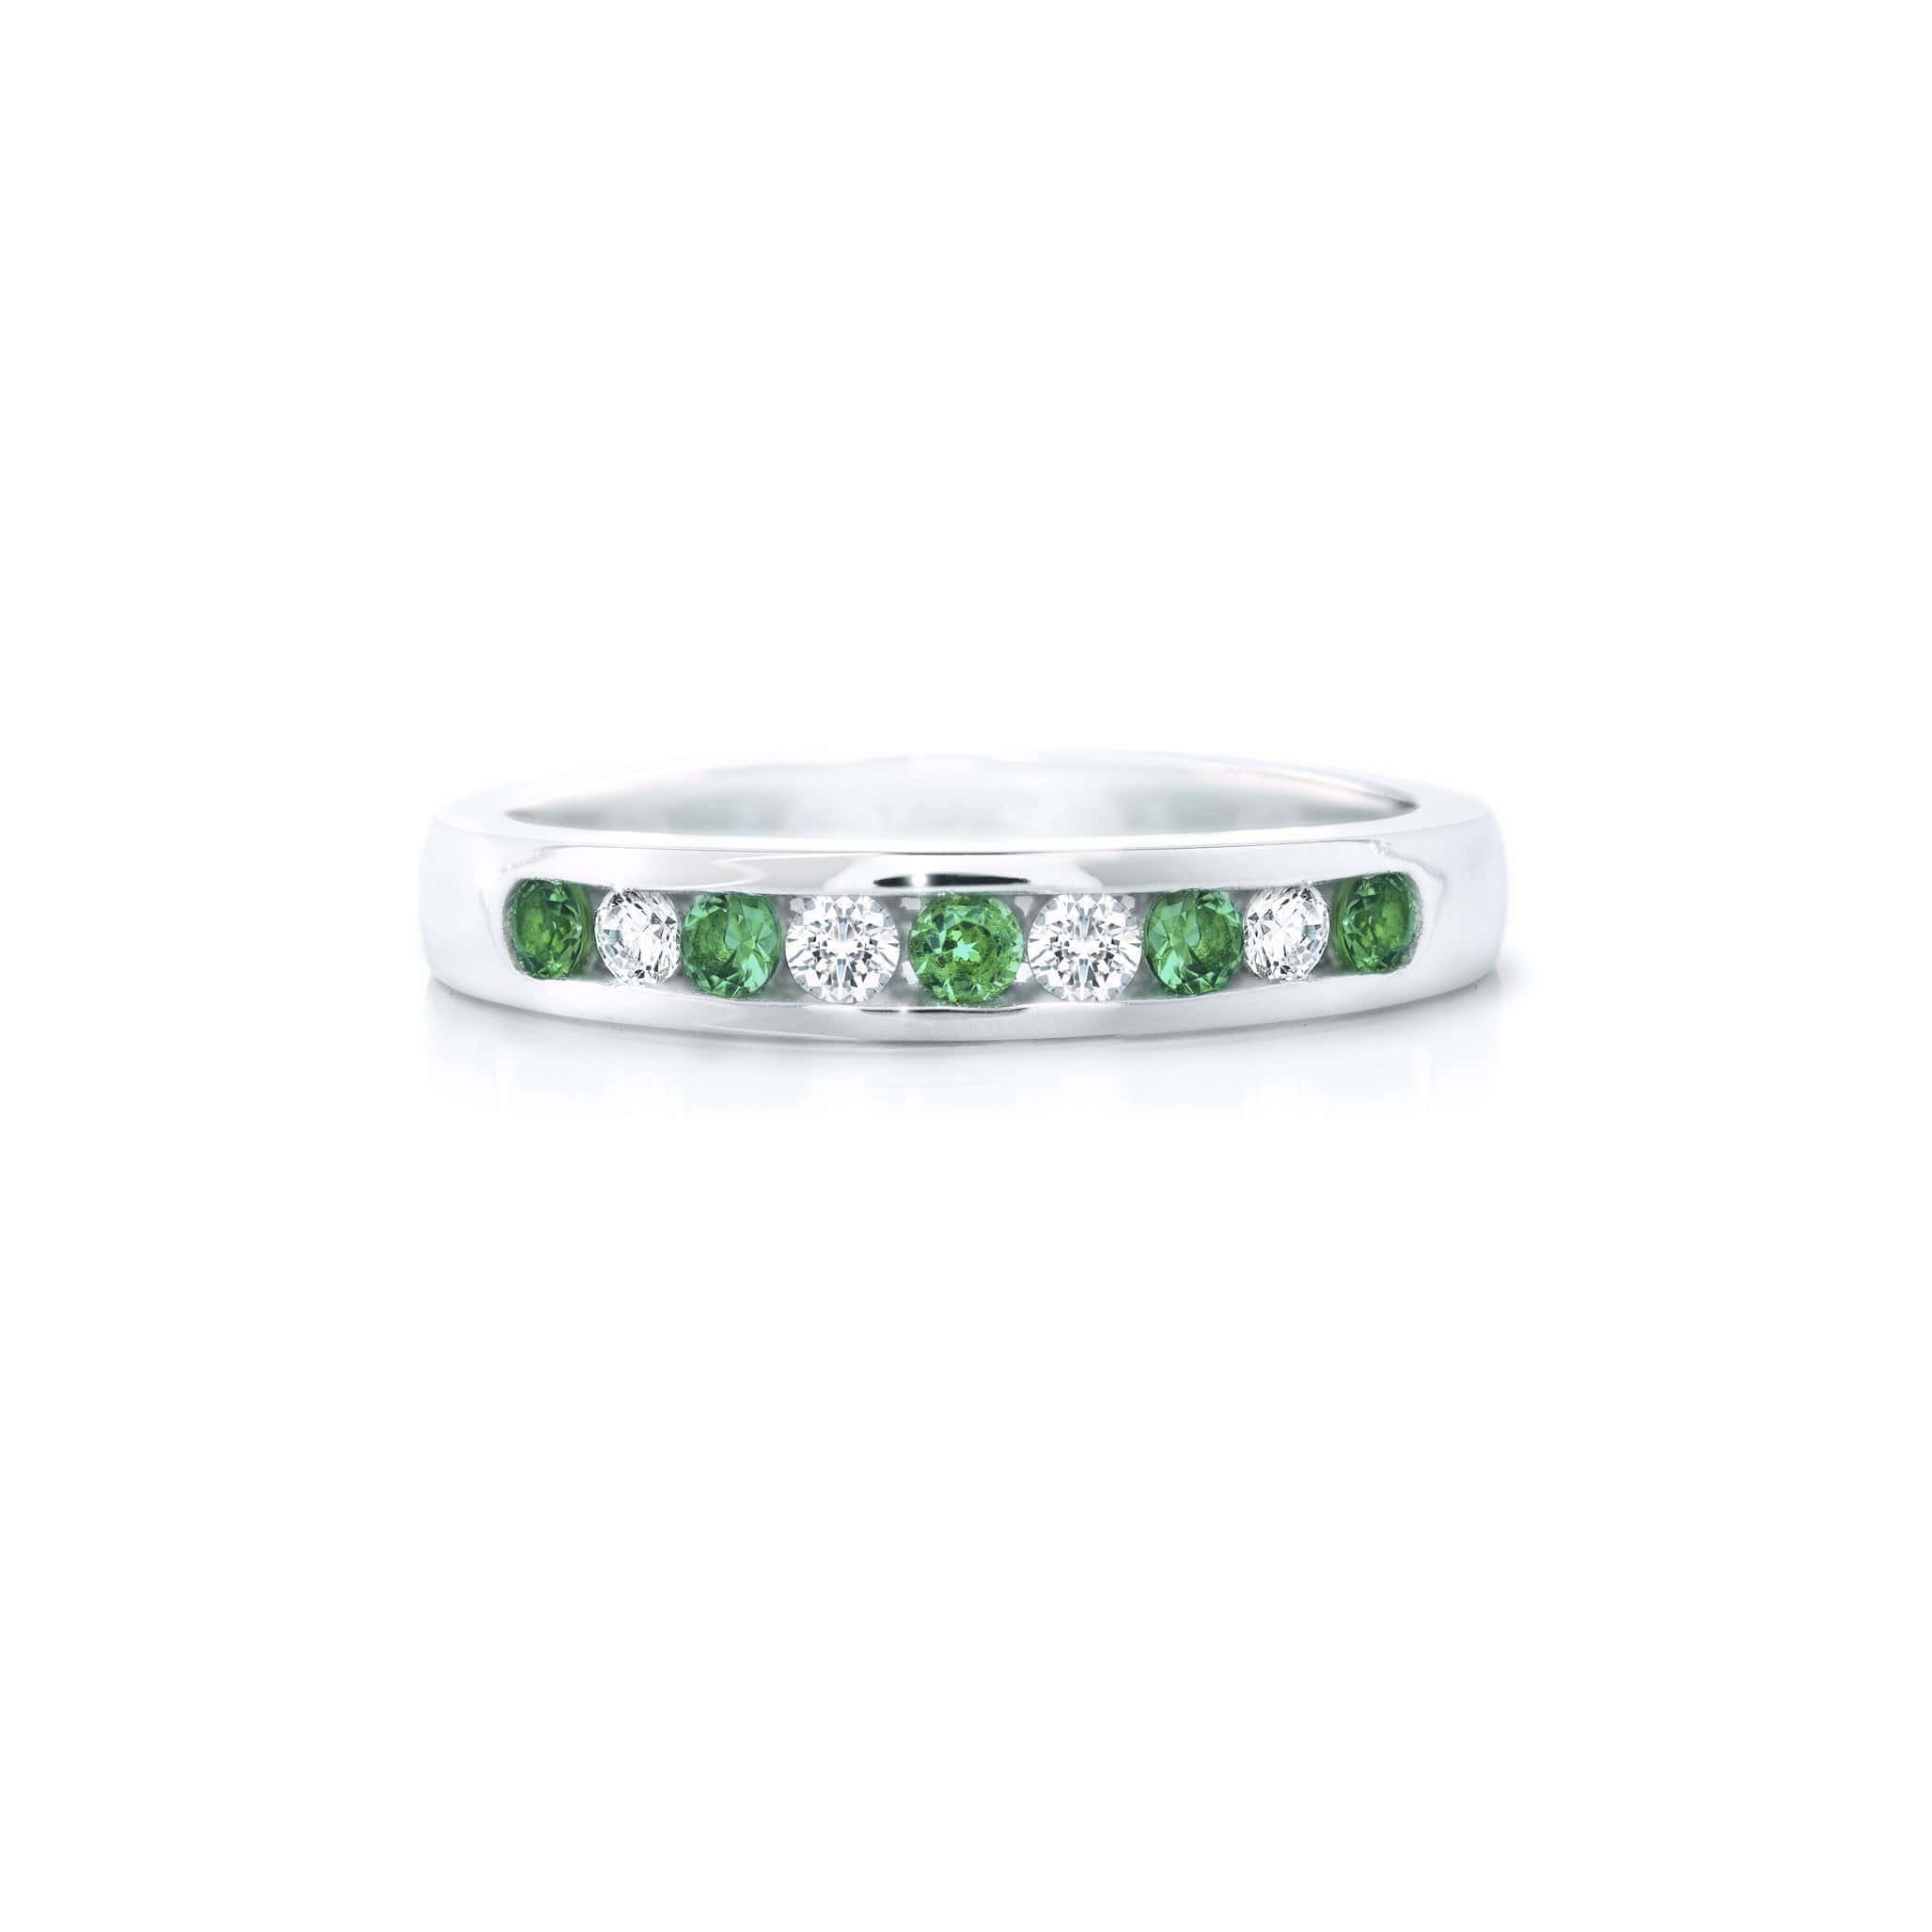 Lynora Jewellery Ring Opulence Channel Set Ring Sterling Silver & Emerald Stone Colour